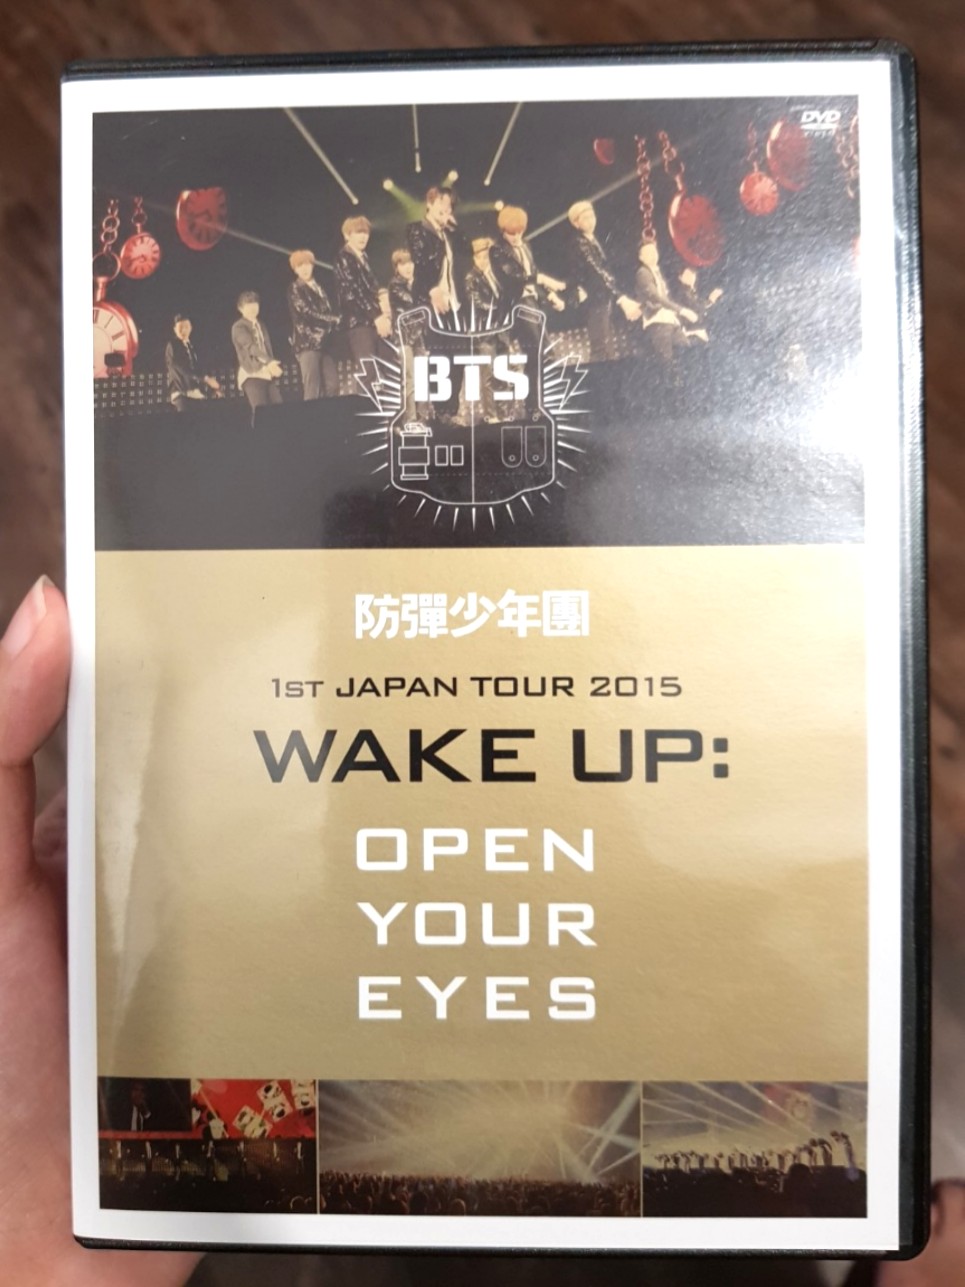 WTS] BTS 1st Japan Tour Wake Up: Open Your Eyes Official Dvd, Hobbies   Toys, Music  Media, CDs  DVDs on Carousell